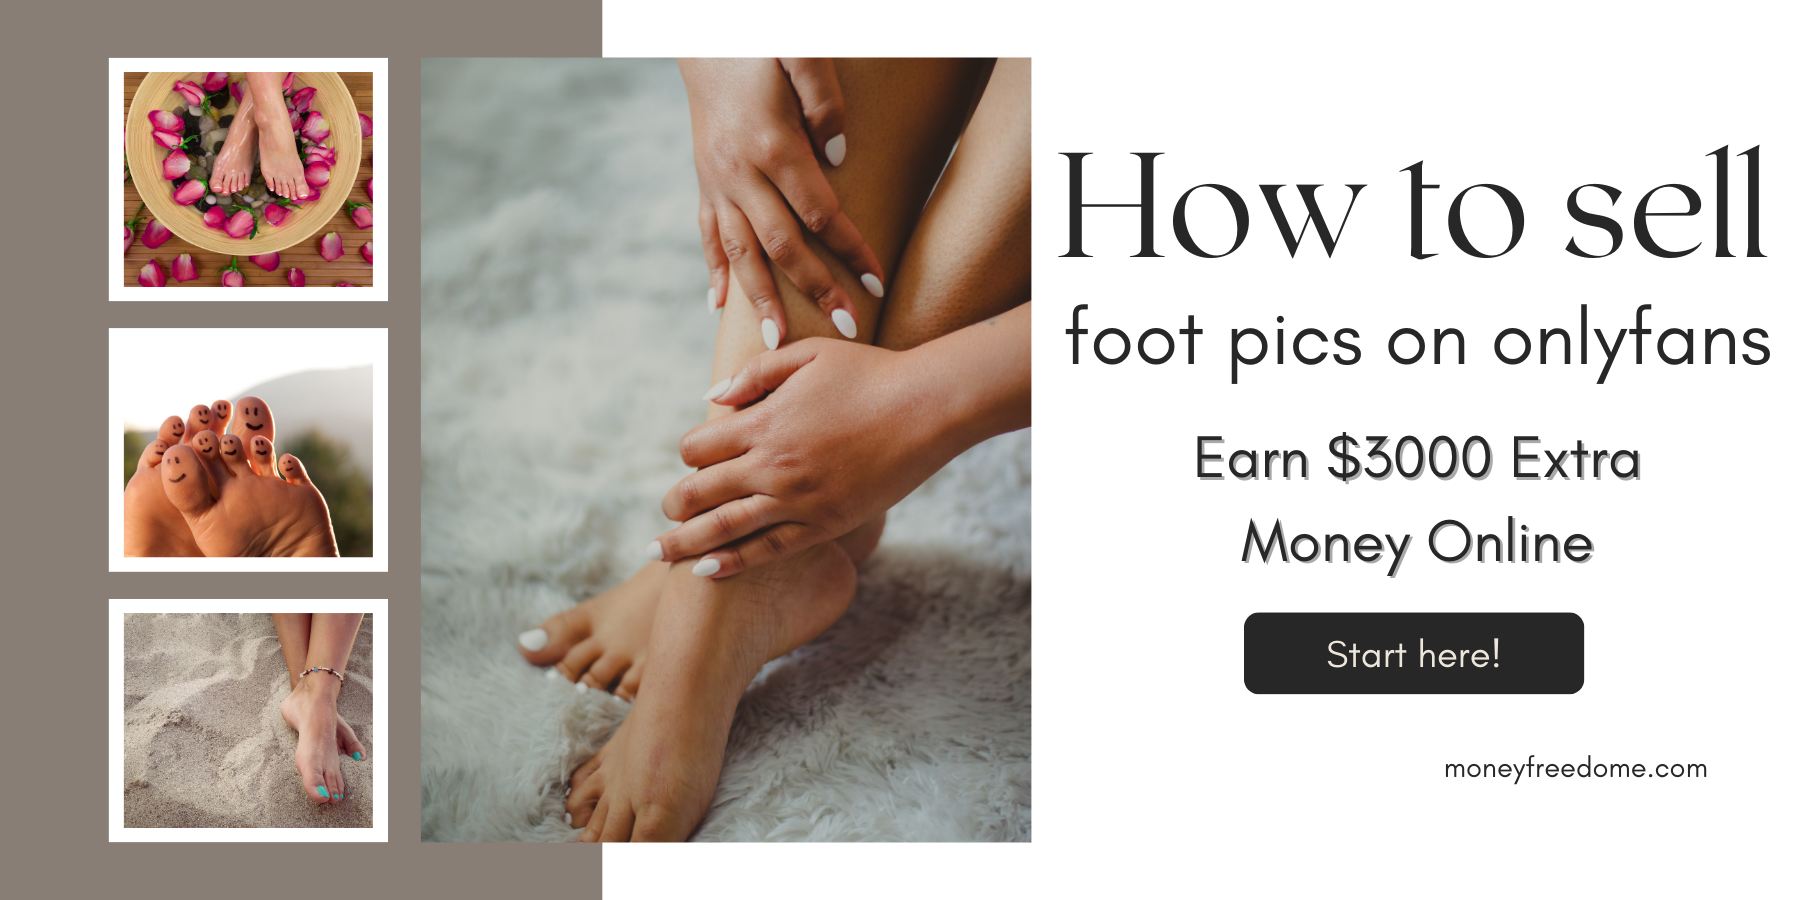 How to Sell Feet Pics on Onlyfans Step By Step Guide 4